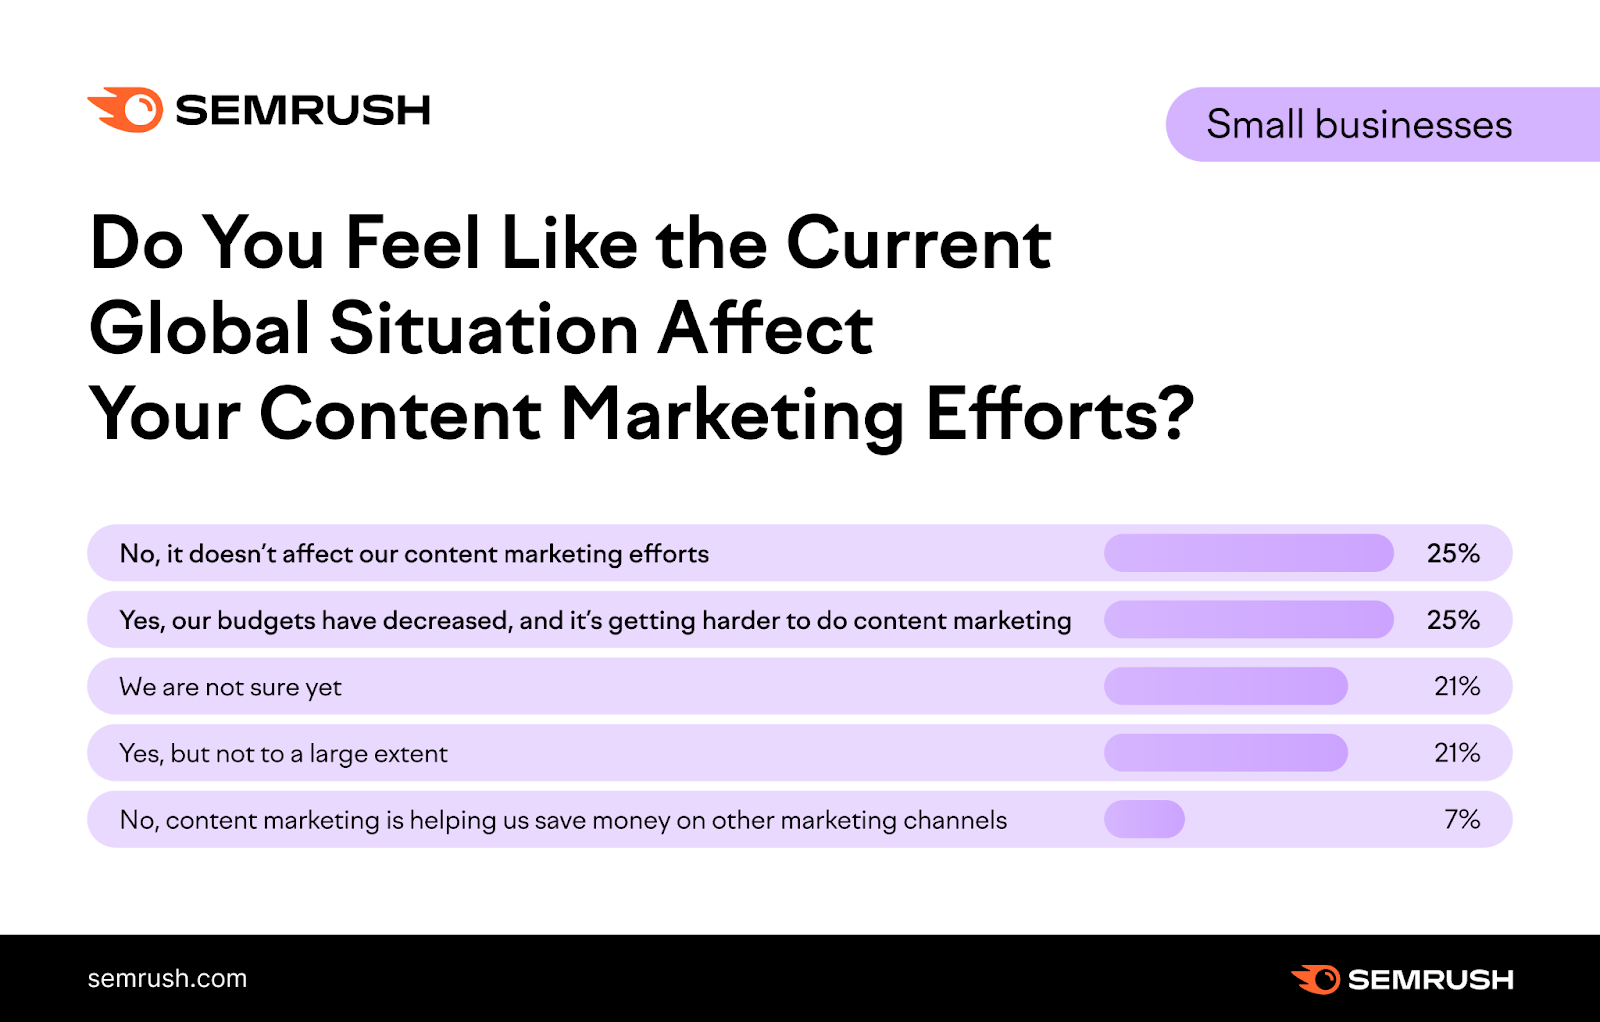 Small businesses and how crisis impacts their content marketing